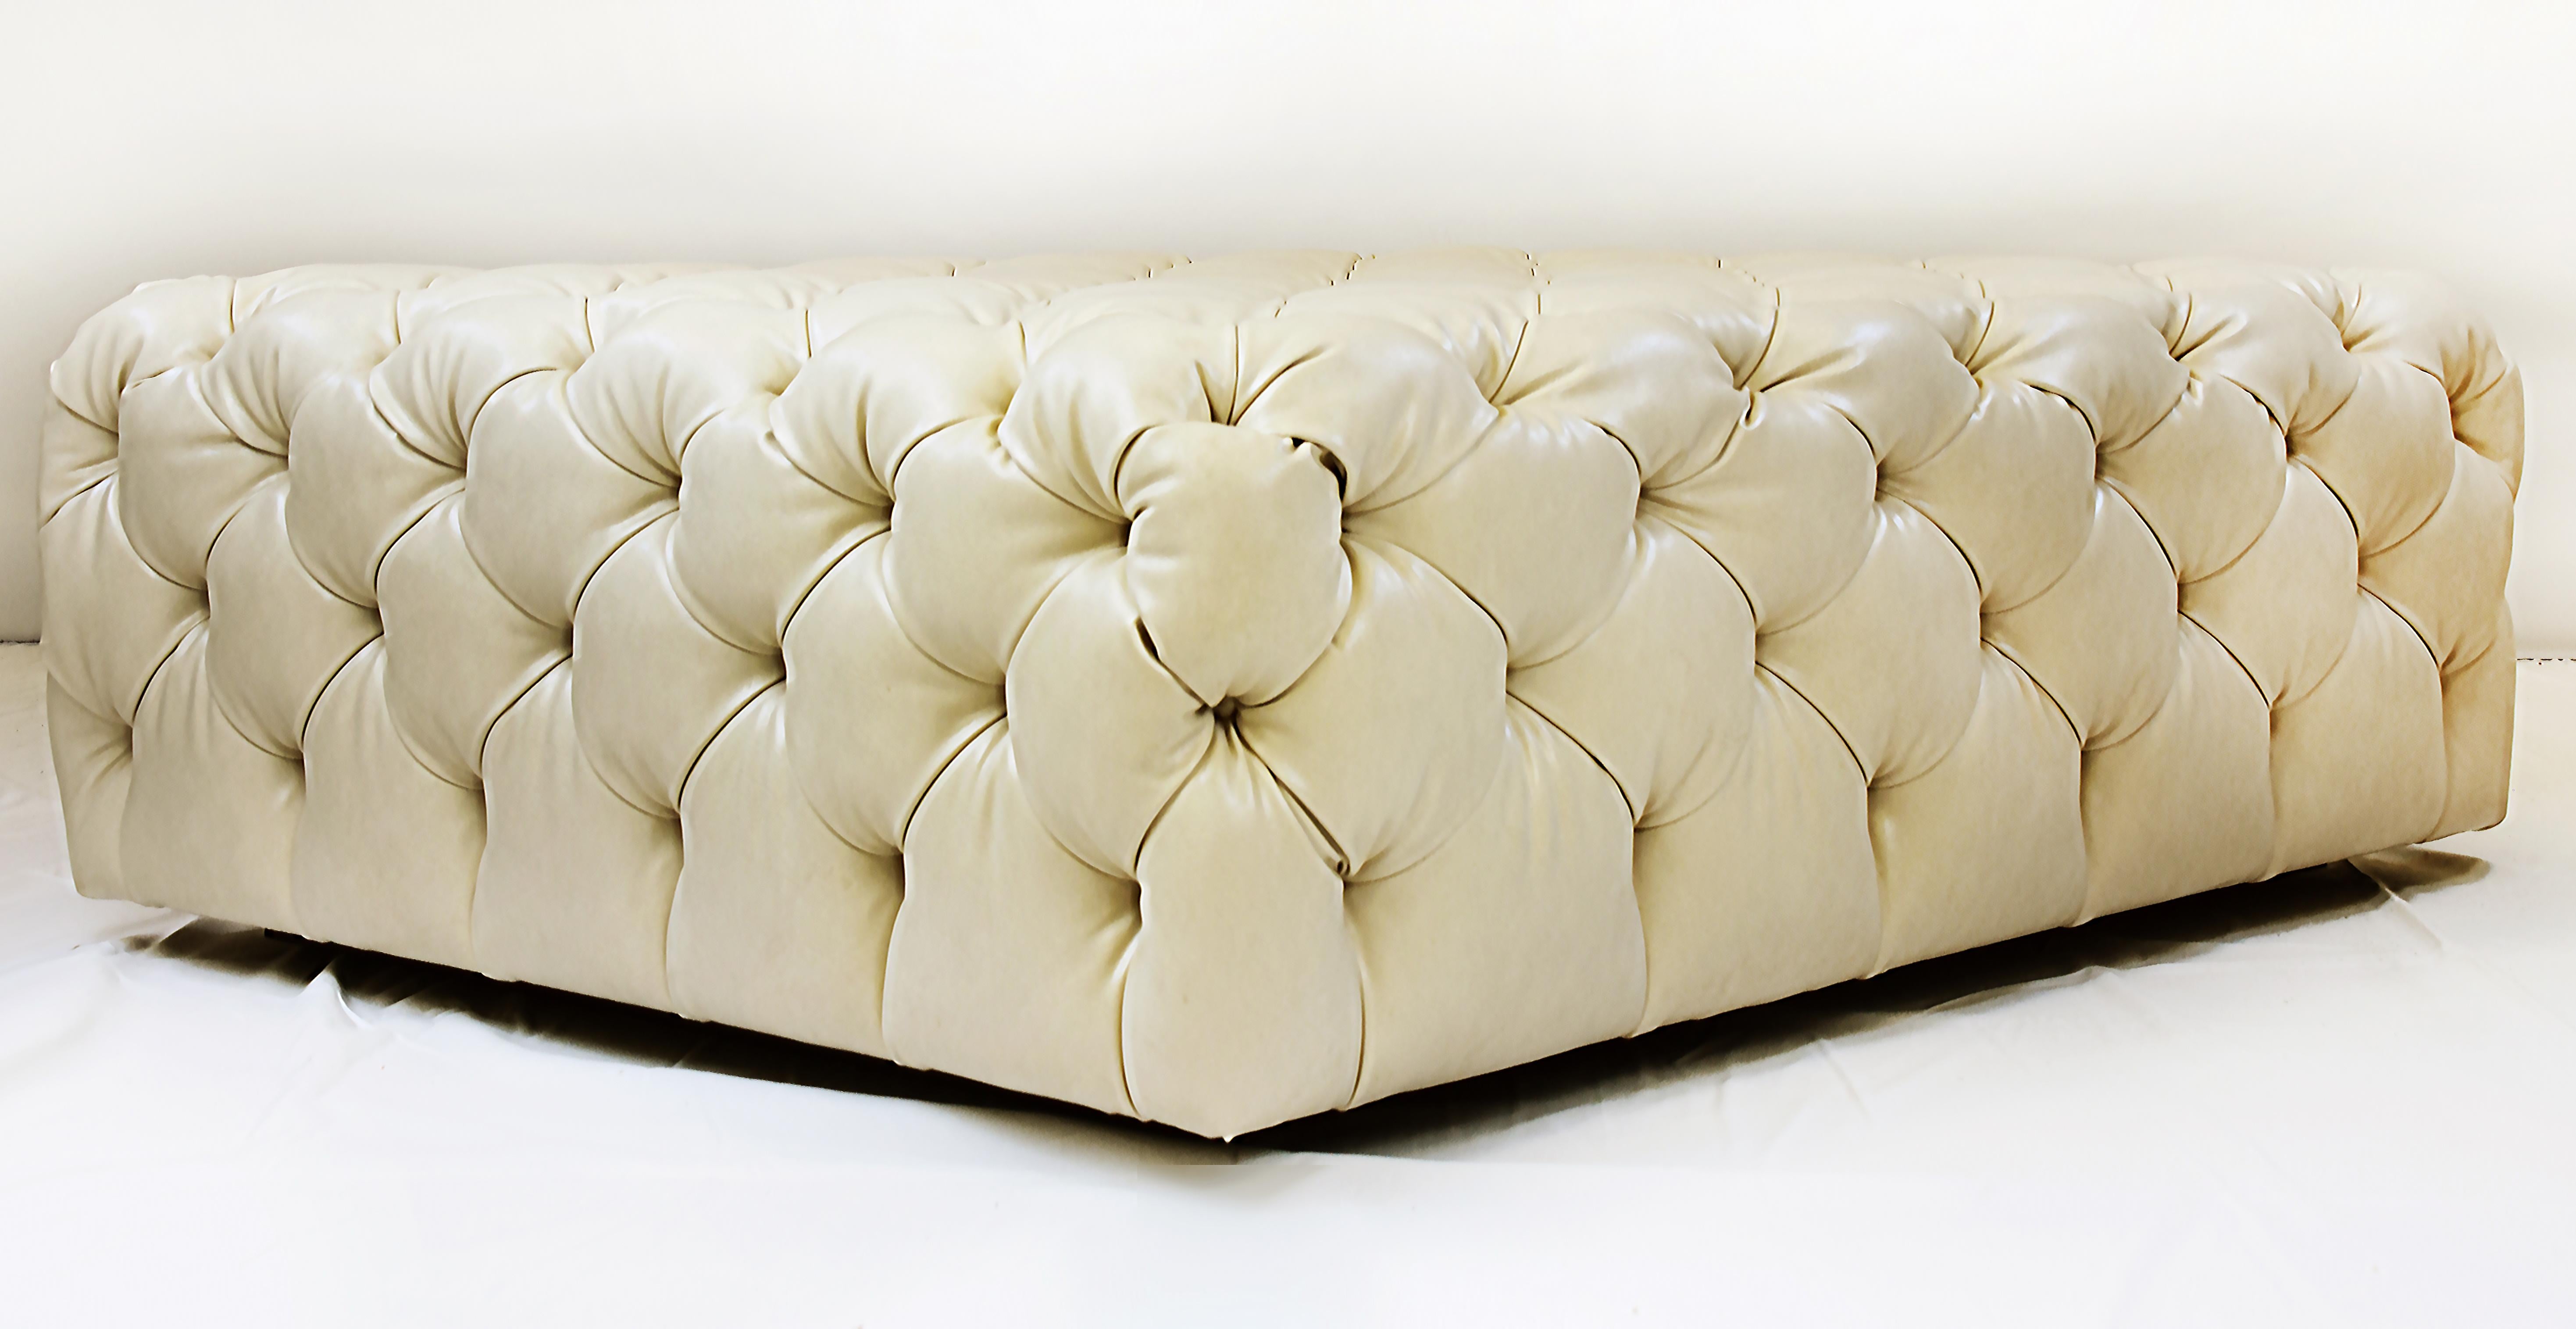 Contemporary Le Jeune Upholstery Bristol Tufted Leather Coffee Table  Floor Model For Sale